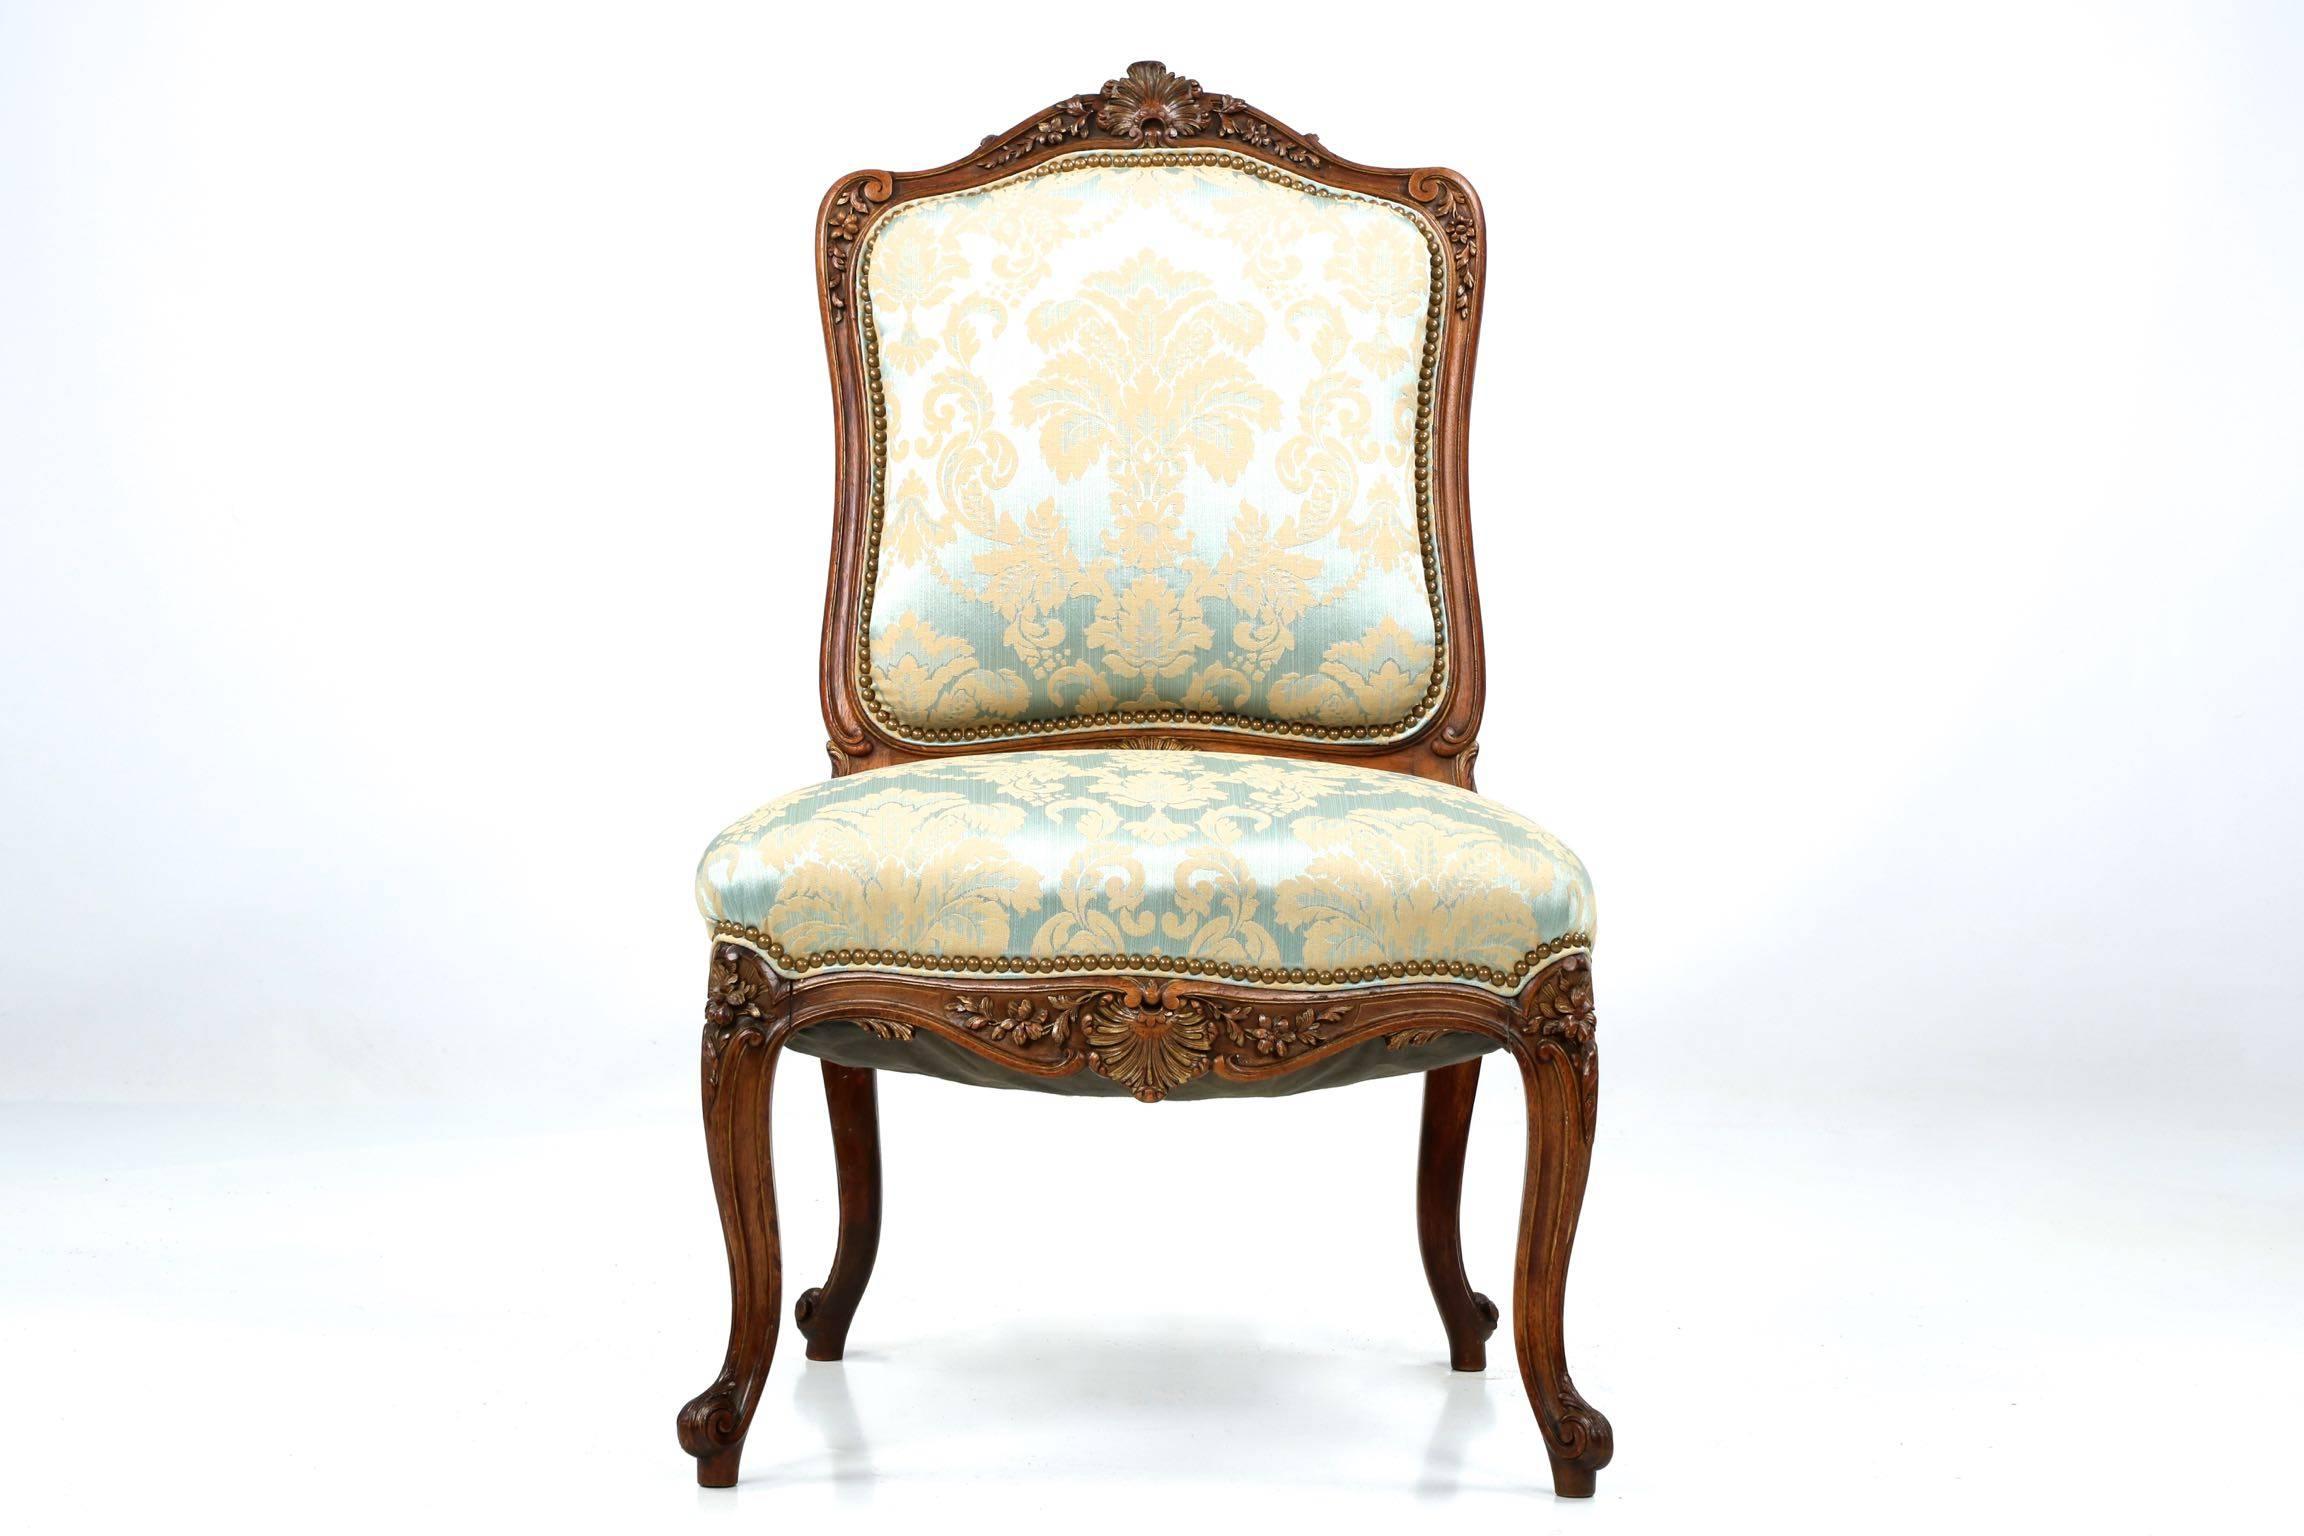 Exquisitely carved and crafted during the Rococo Revival period, a reinterpretation of the original Louis XV designs of 100 years prior with what, at the time, was a modern twist. The crest rail is an intricate display of rocaille and floral motifs,